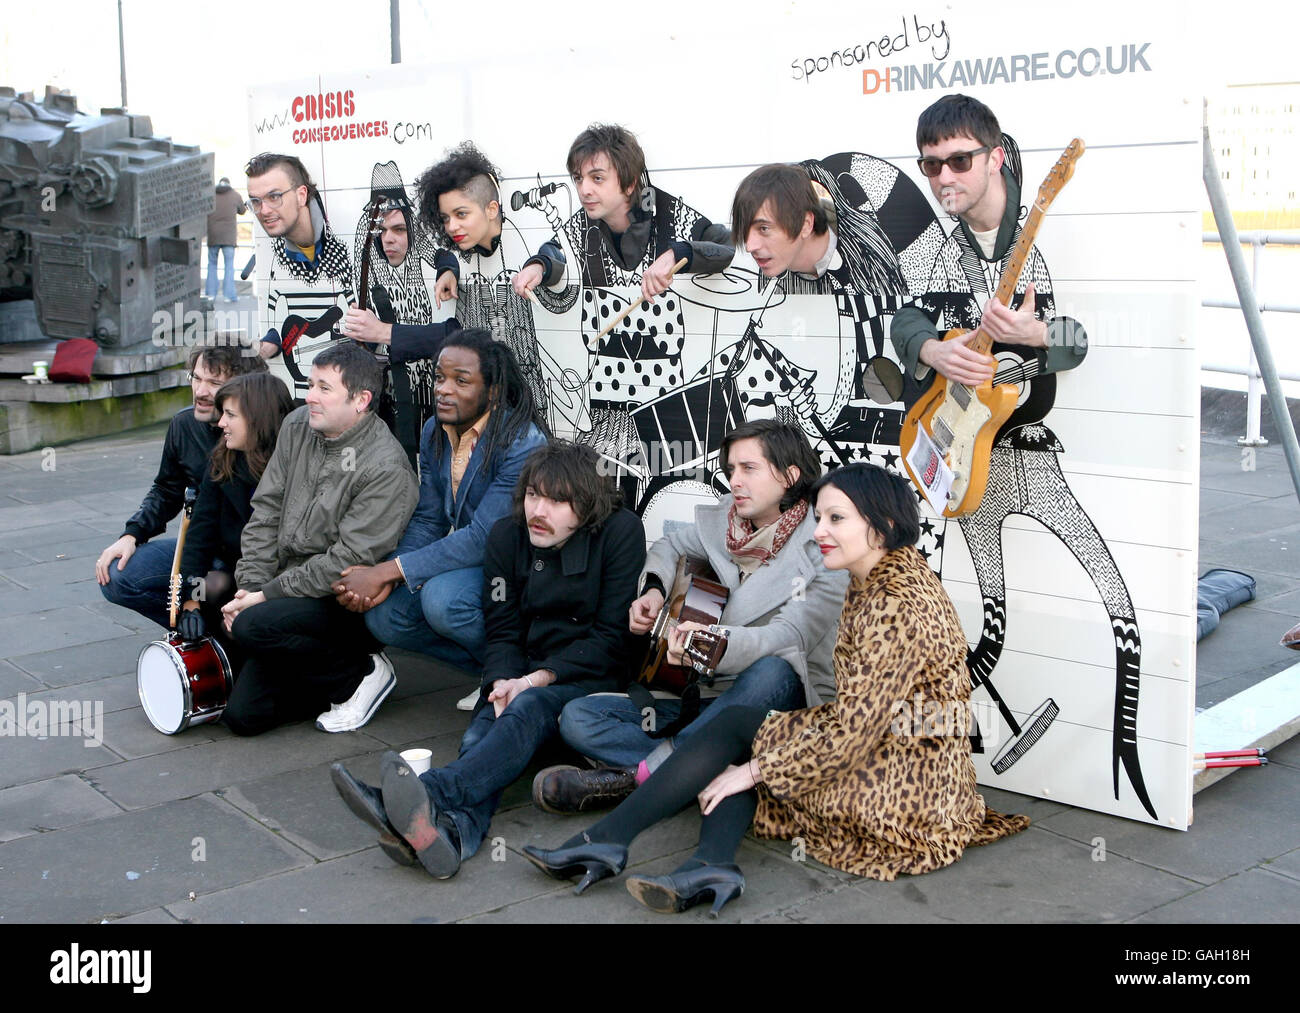 (left-right top row) Jon McClure from Reverend and the Makers, Gaz Coombes from Supergrass, Tahita Bulmer from the New Young Pony Club, Danny Goffey from Supergrass, Drew McConnell from Babyshambles, Graham Coxon from Blur. (Bottom row left-right) Andy Spence and Sarah Jones from the New Young Pony Club, unknown, Gary Powell, Didz Hammond and Carl Barat from Dirty Pretty Things and fashion designer Pearl Lowe, raise awareness for the homelessness charity Crisis' 'Consequences' campaign outside the Design Museum in London. Stock Photo